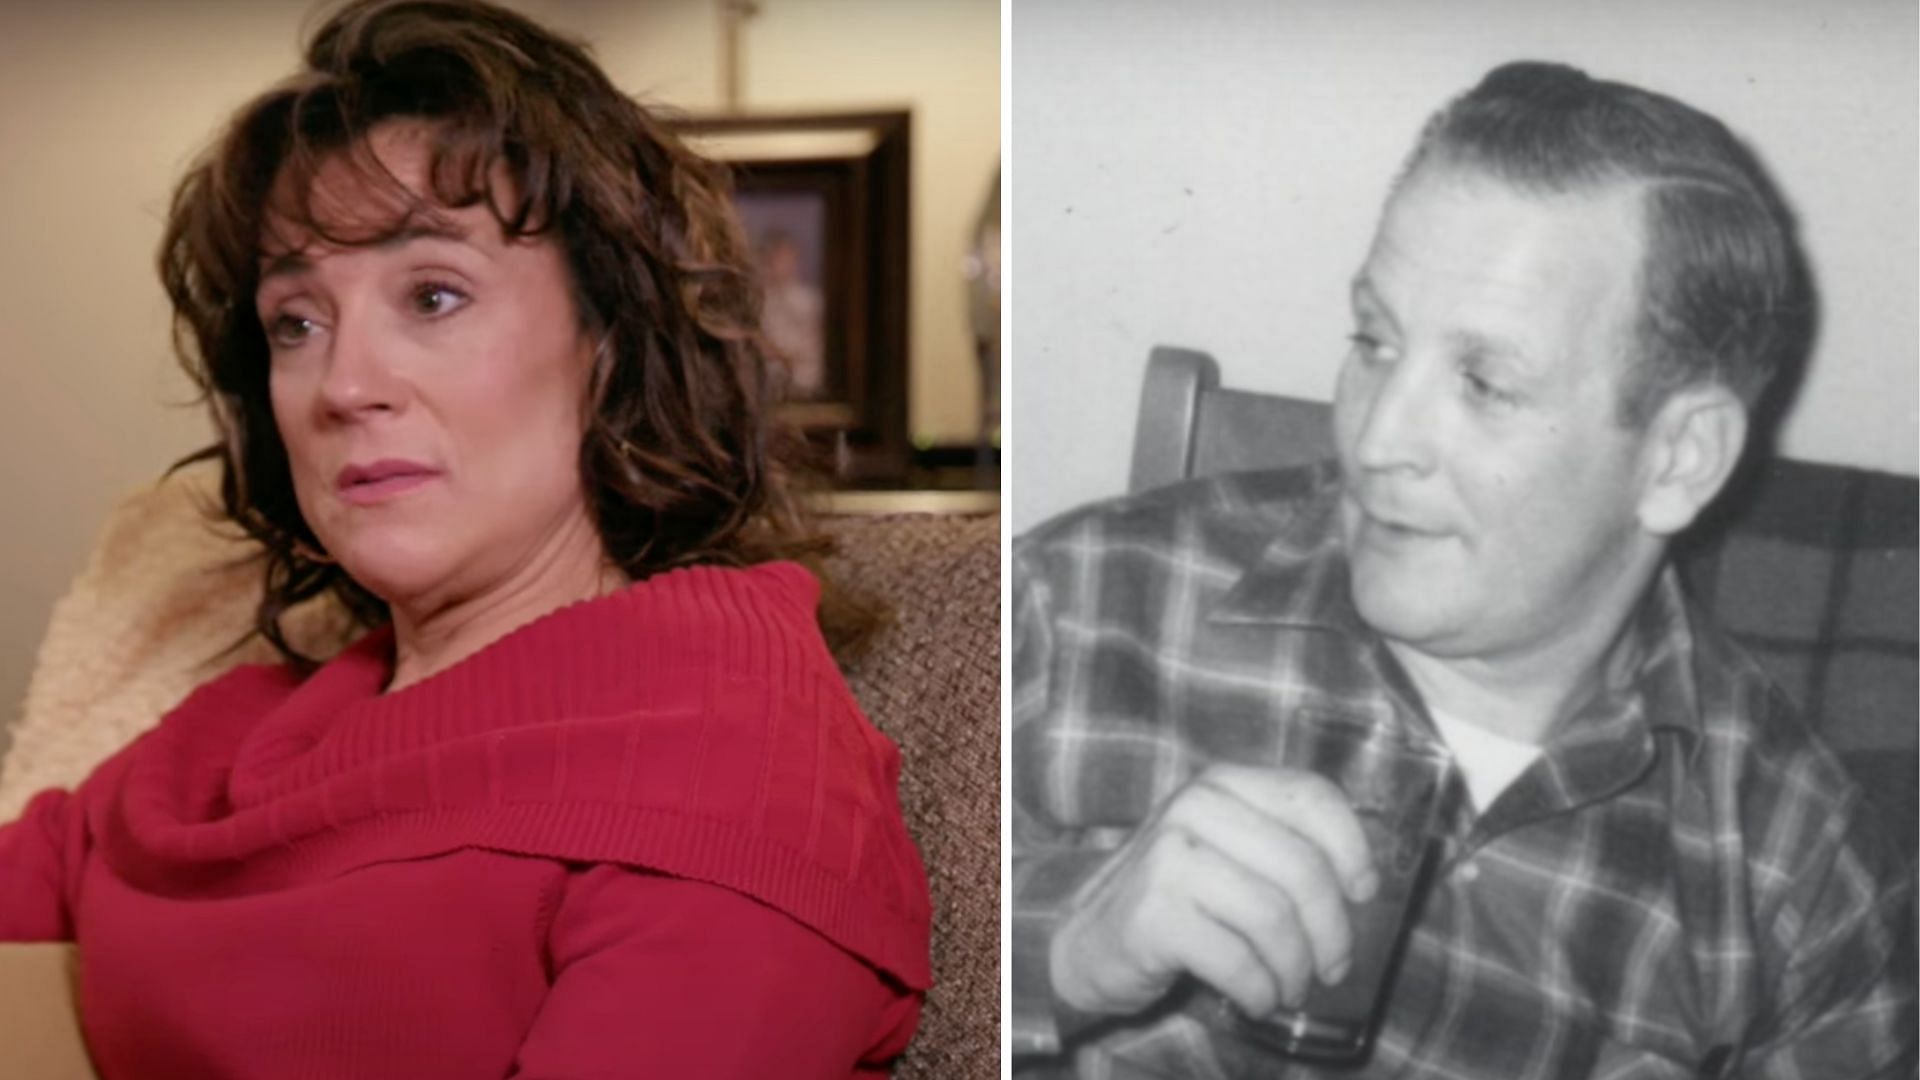 April Balascio, Edward Wayne Edwards daughter turned him in after discovering the harrowing truth about the murders he committed decades ago (Image via Paramount Network/YouTube)